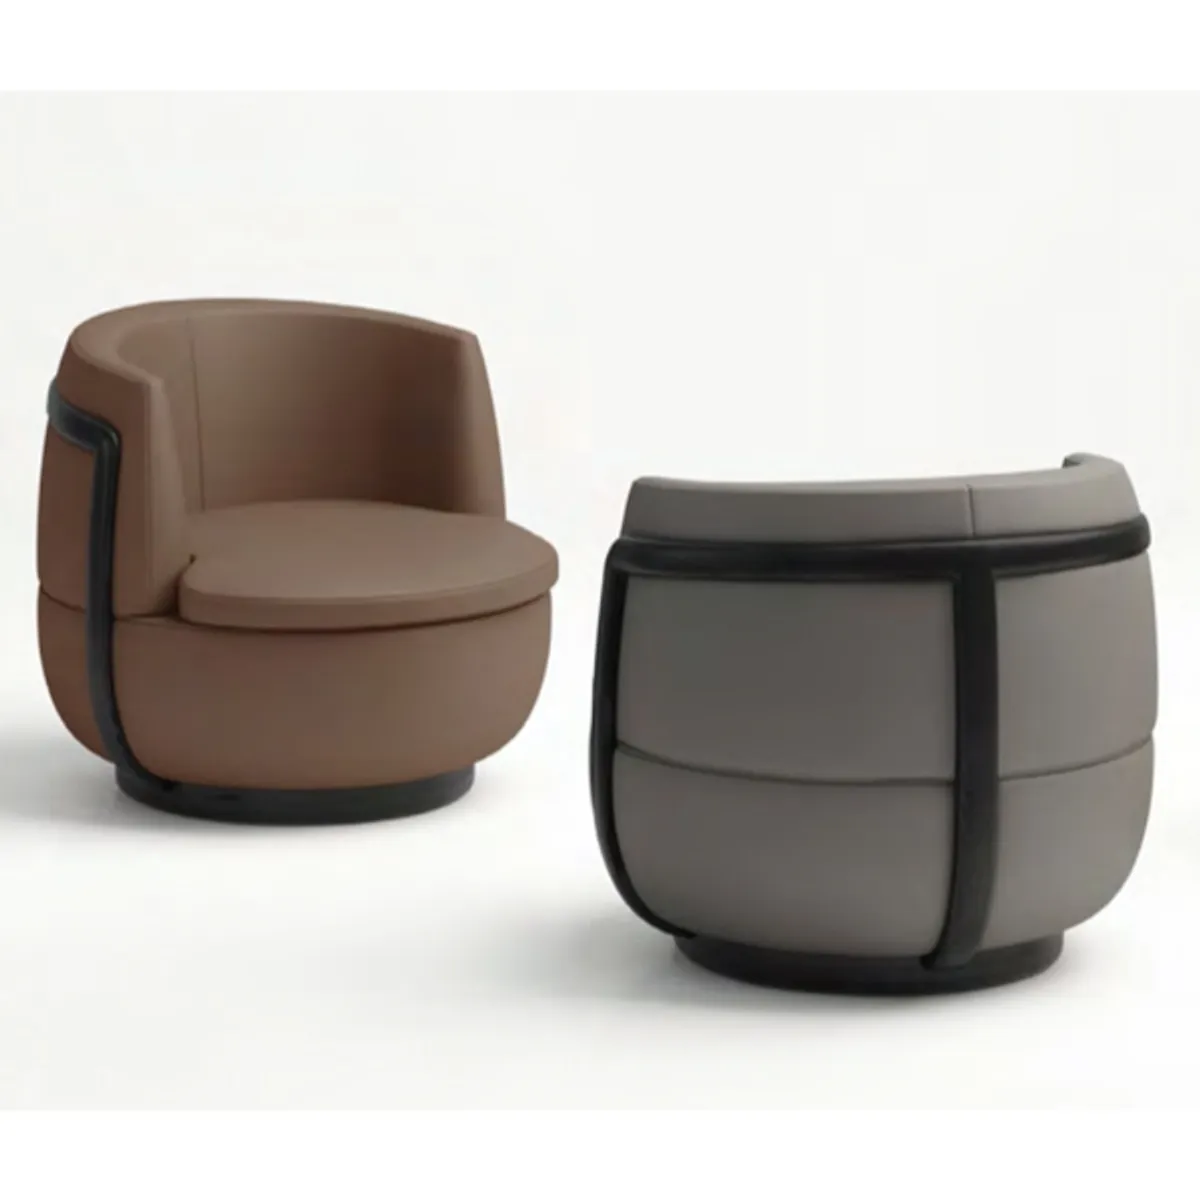 Bulb wood lounge chair Inside Out Contracts2